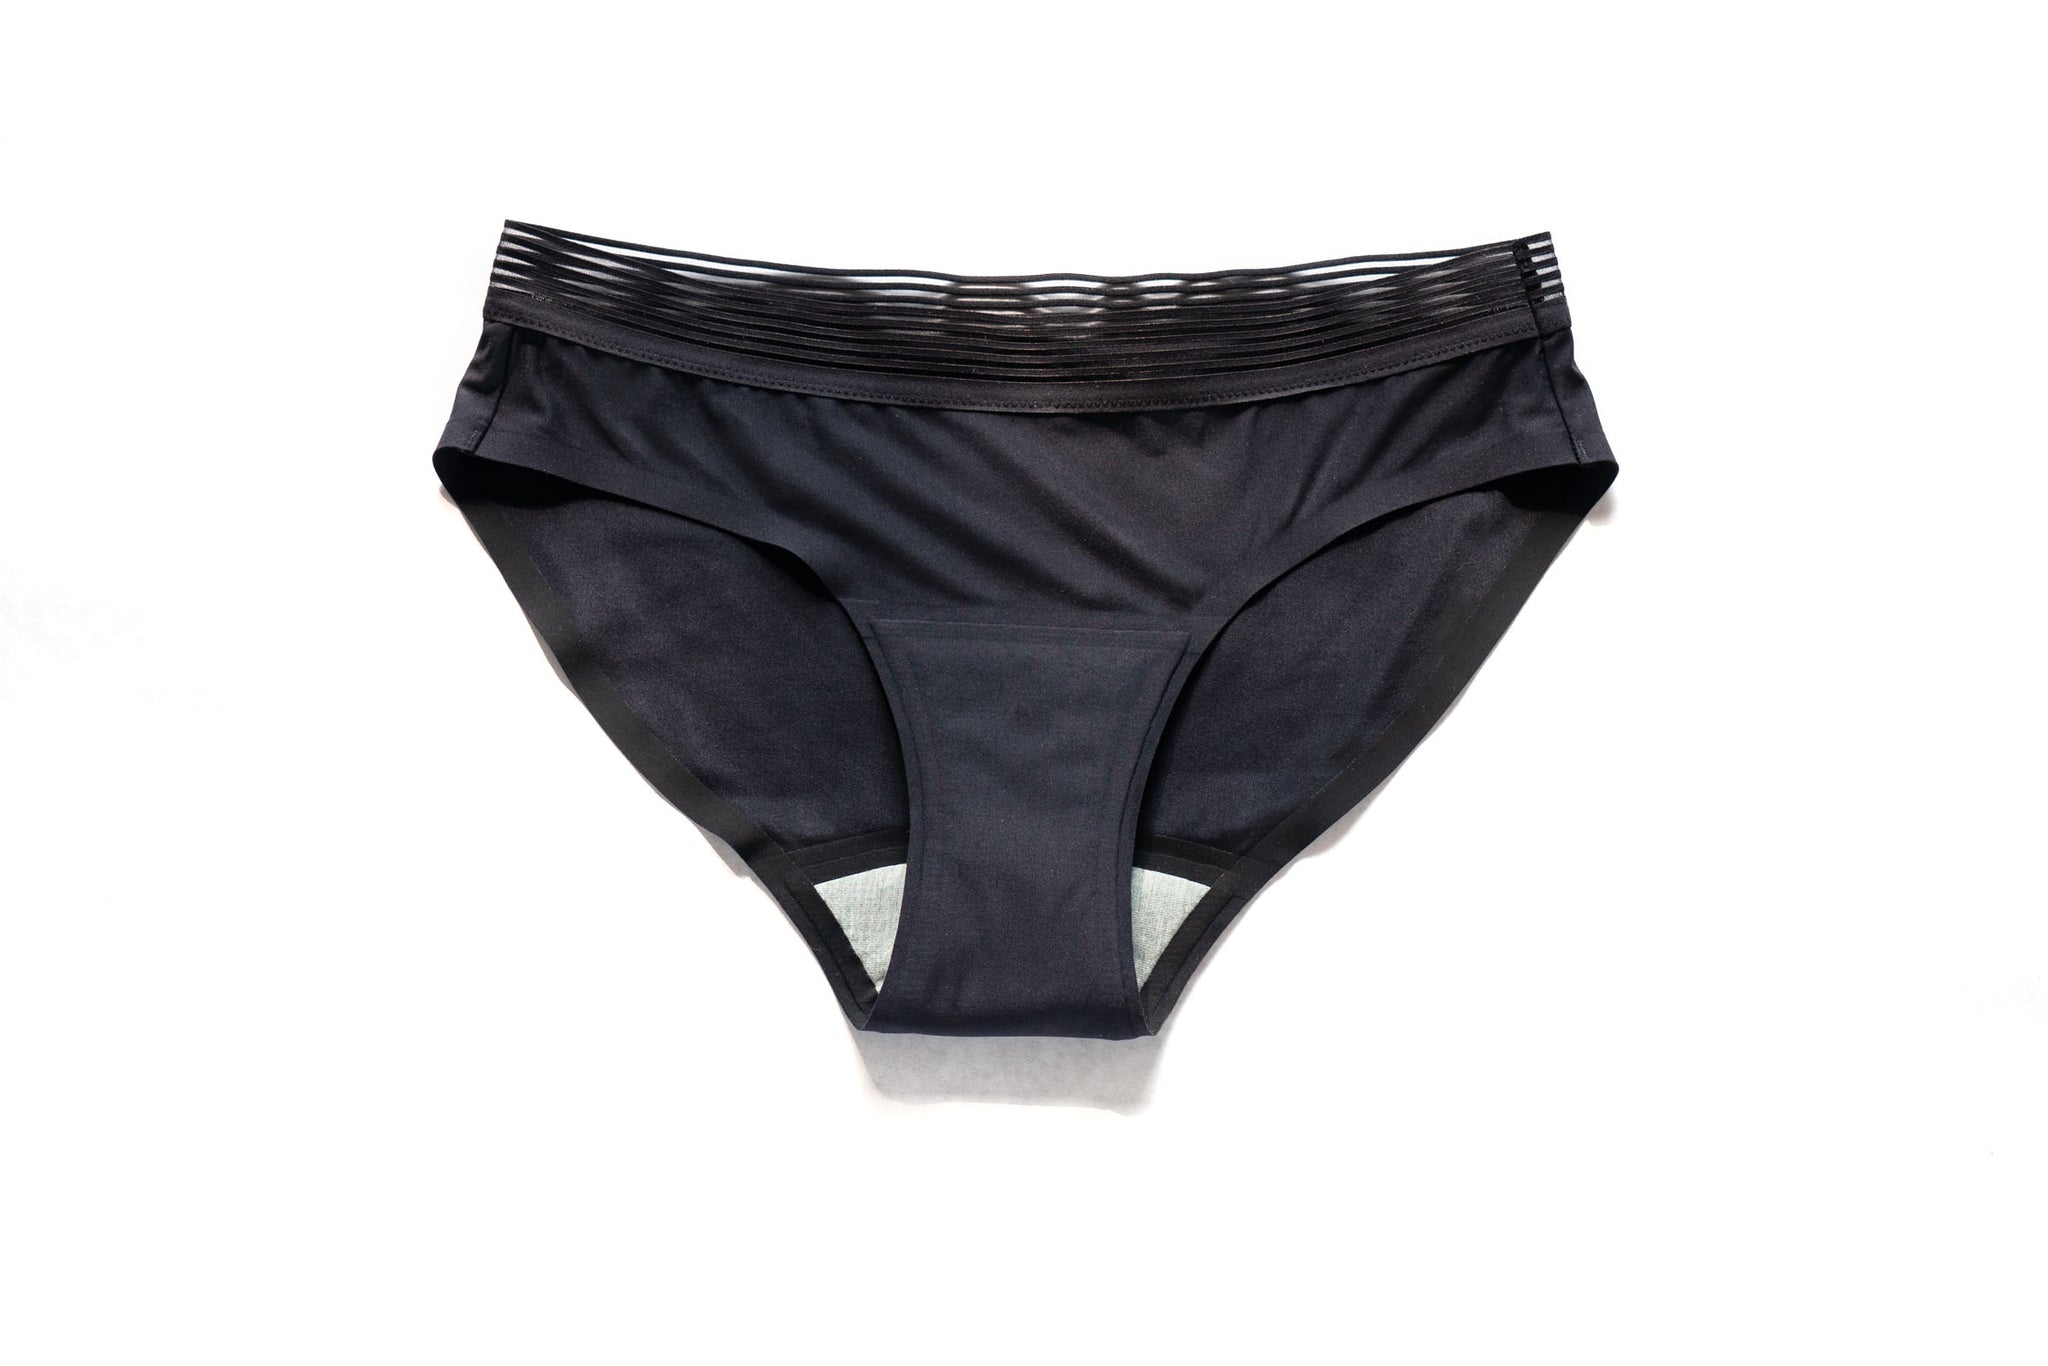 Giggle Knickers Low Rise Brief Incontinence Underwear